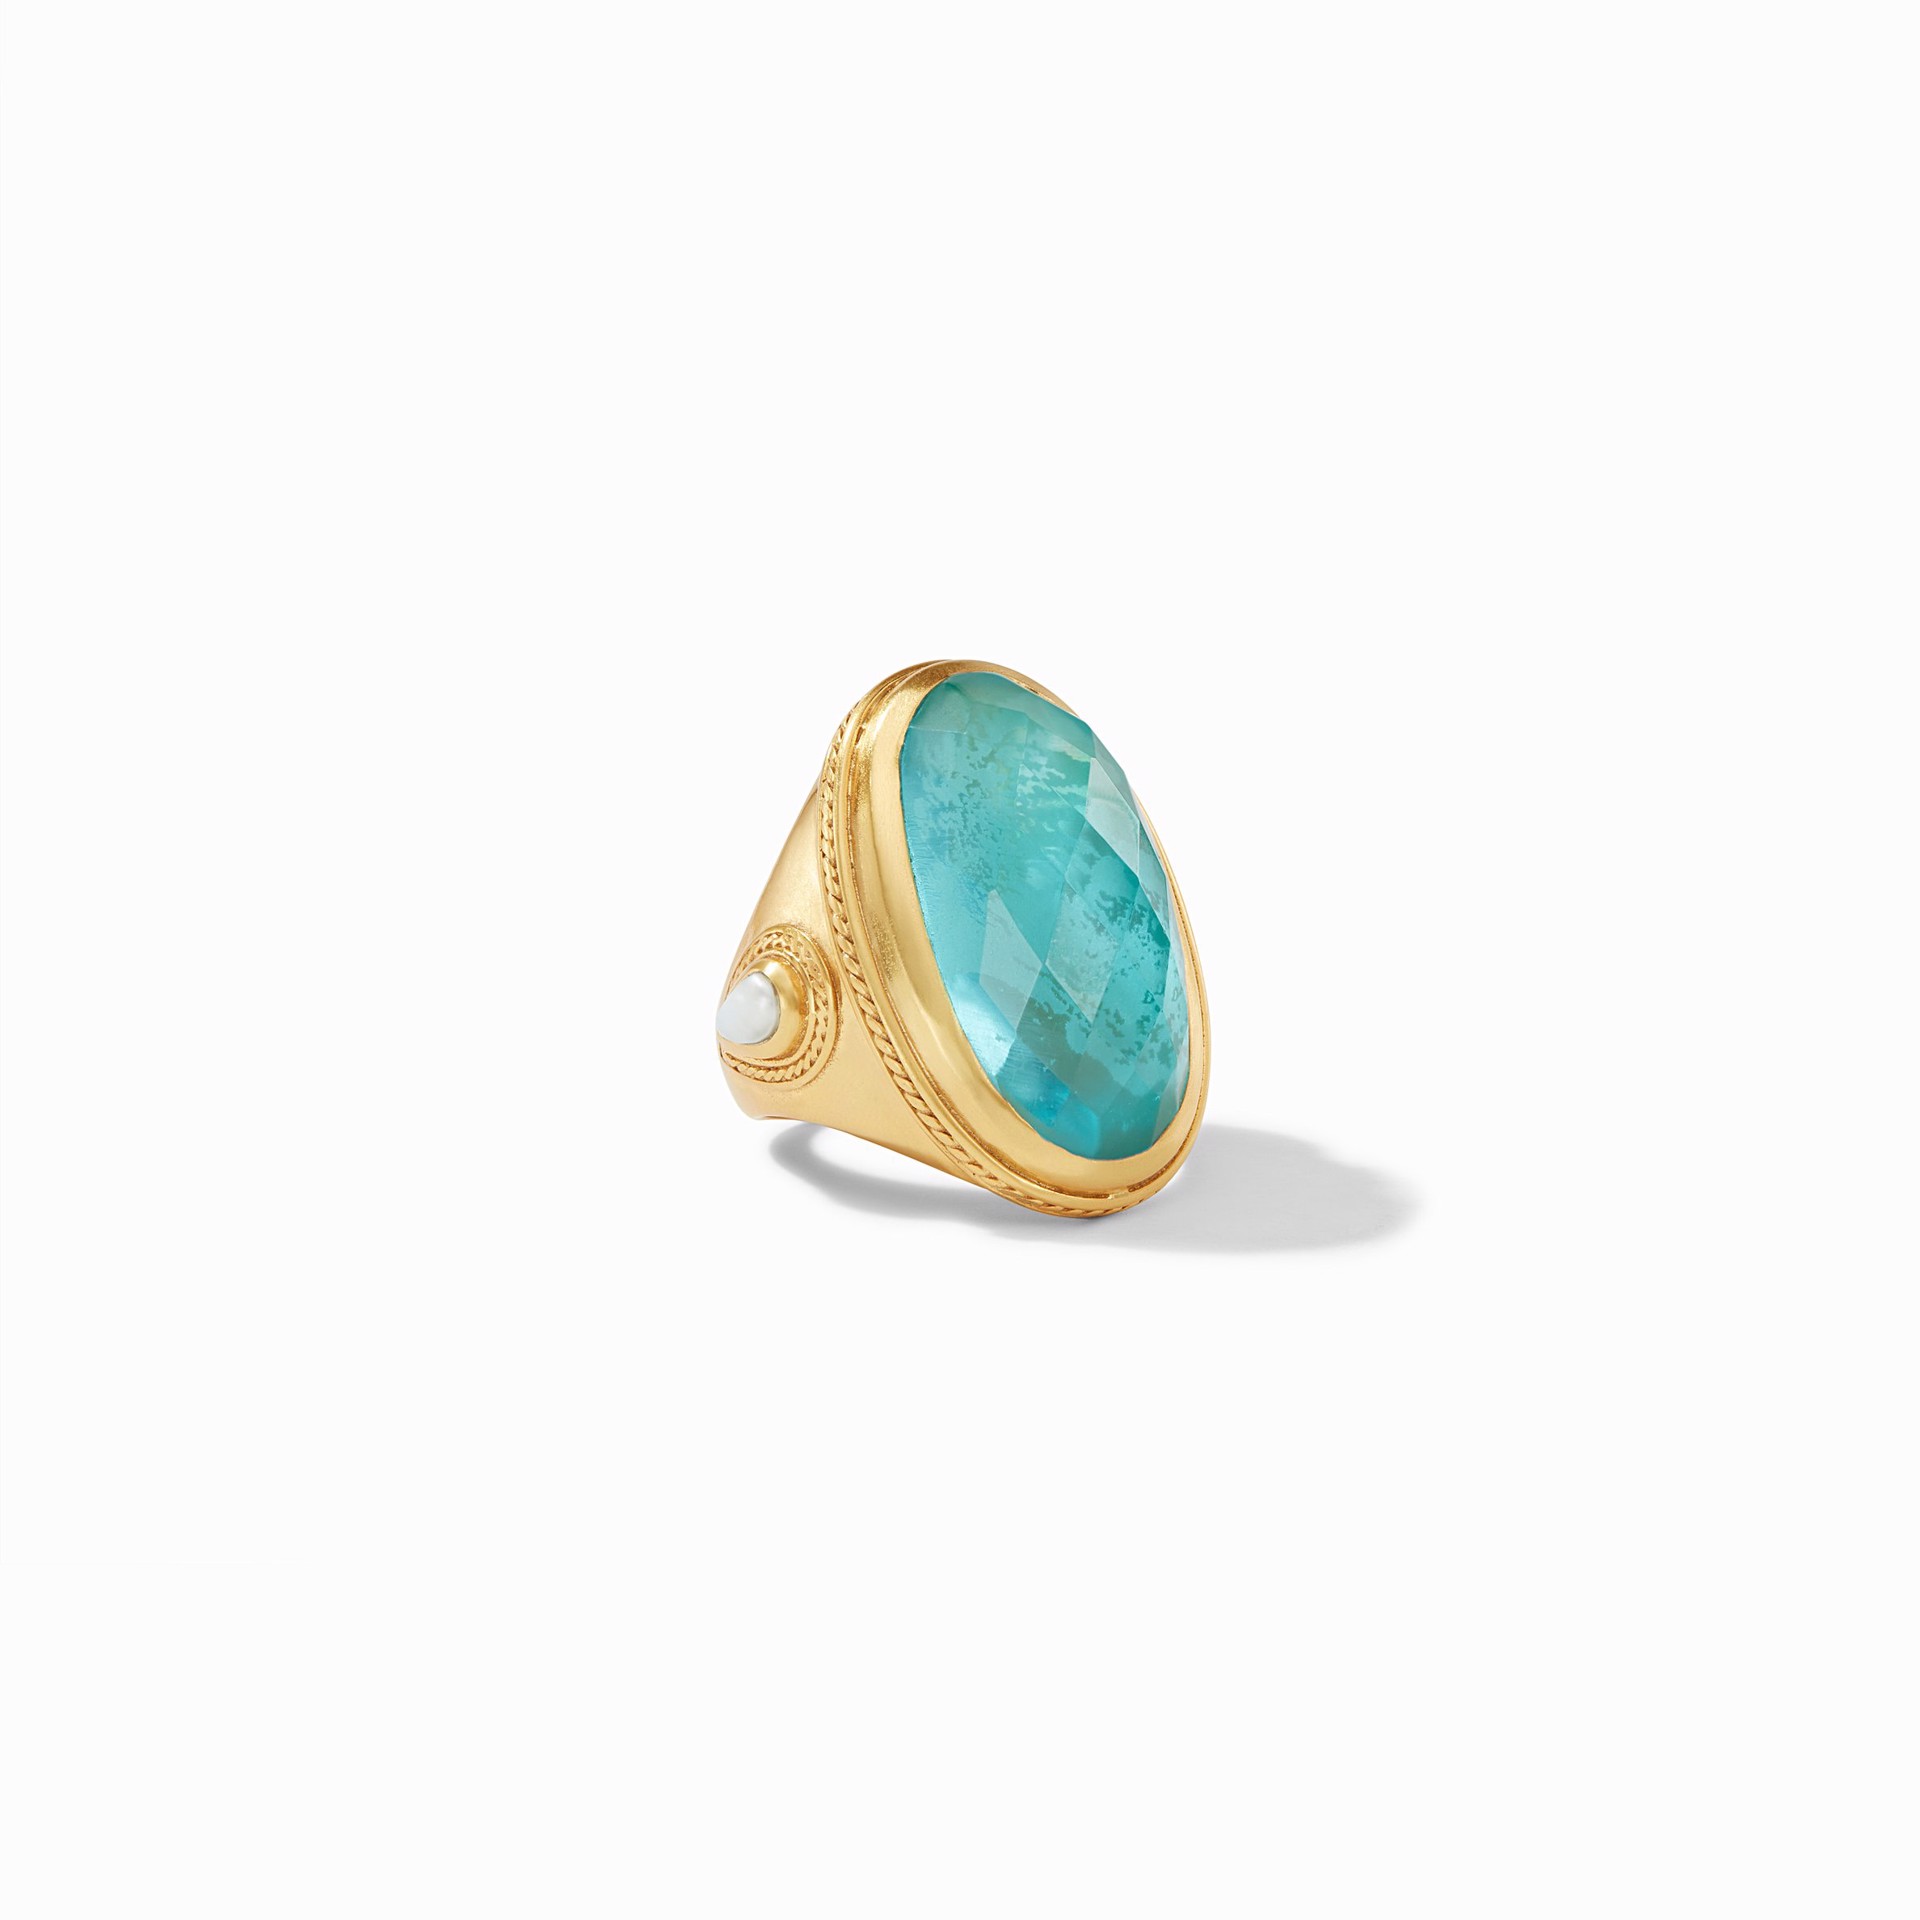 Cassis Statement Ring - Iridescent Bahamian Blue by Julie Vos